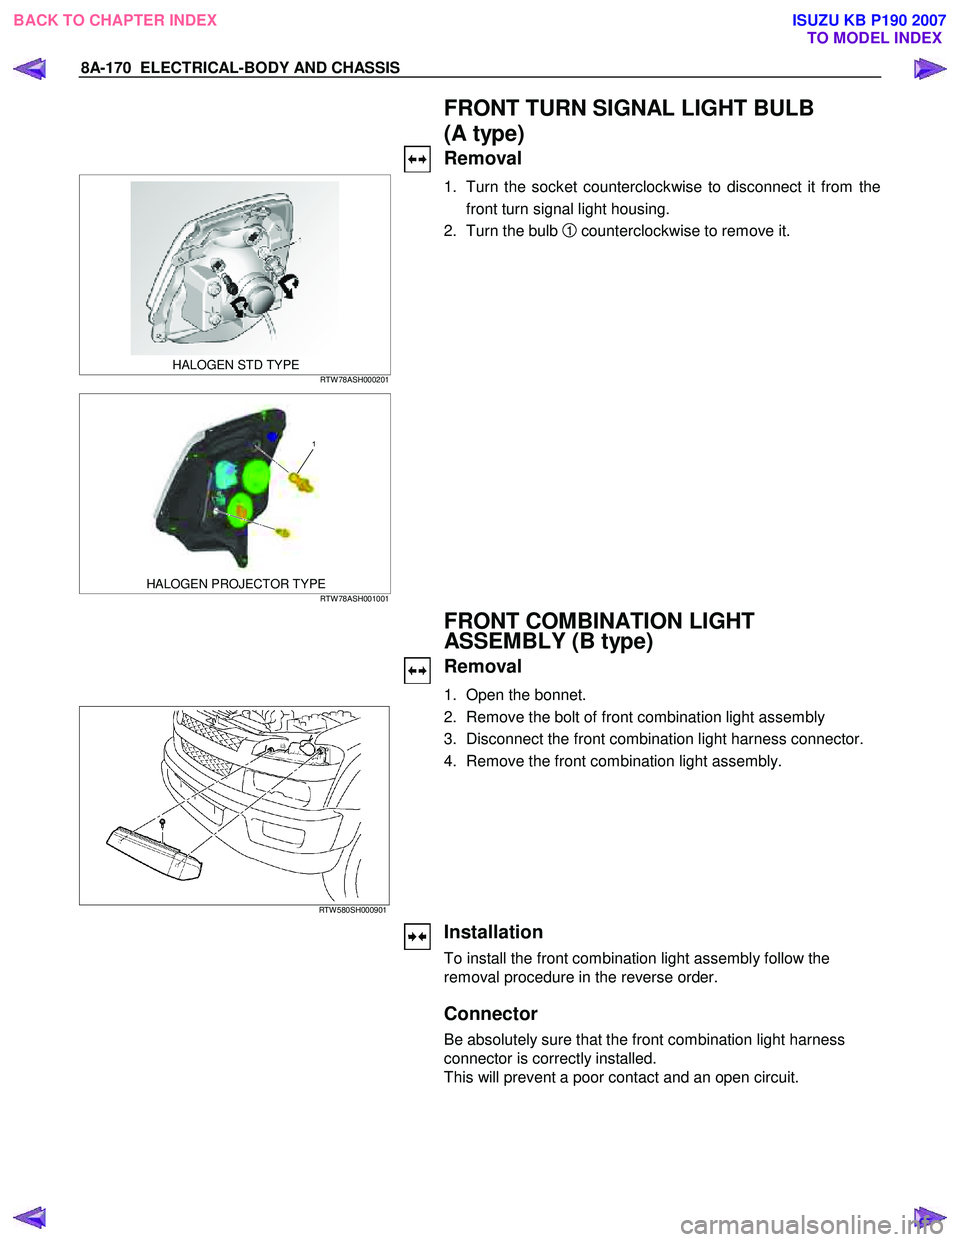 ISUZU KB P190 2007  Workshop Repair Manual 8A-170  ELECTRICAL-BODY AND CHASSIS 
    
 FRONT TURN SIGNAL LIGHT BULB  
(A type) 
Removal 
  
 HALOGEN STD TYPE RTW 78ASH000201 
  
  1.  Turn the socket counterclockwise to disconnect it from the
f